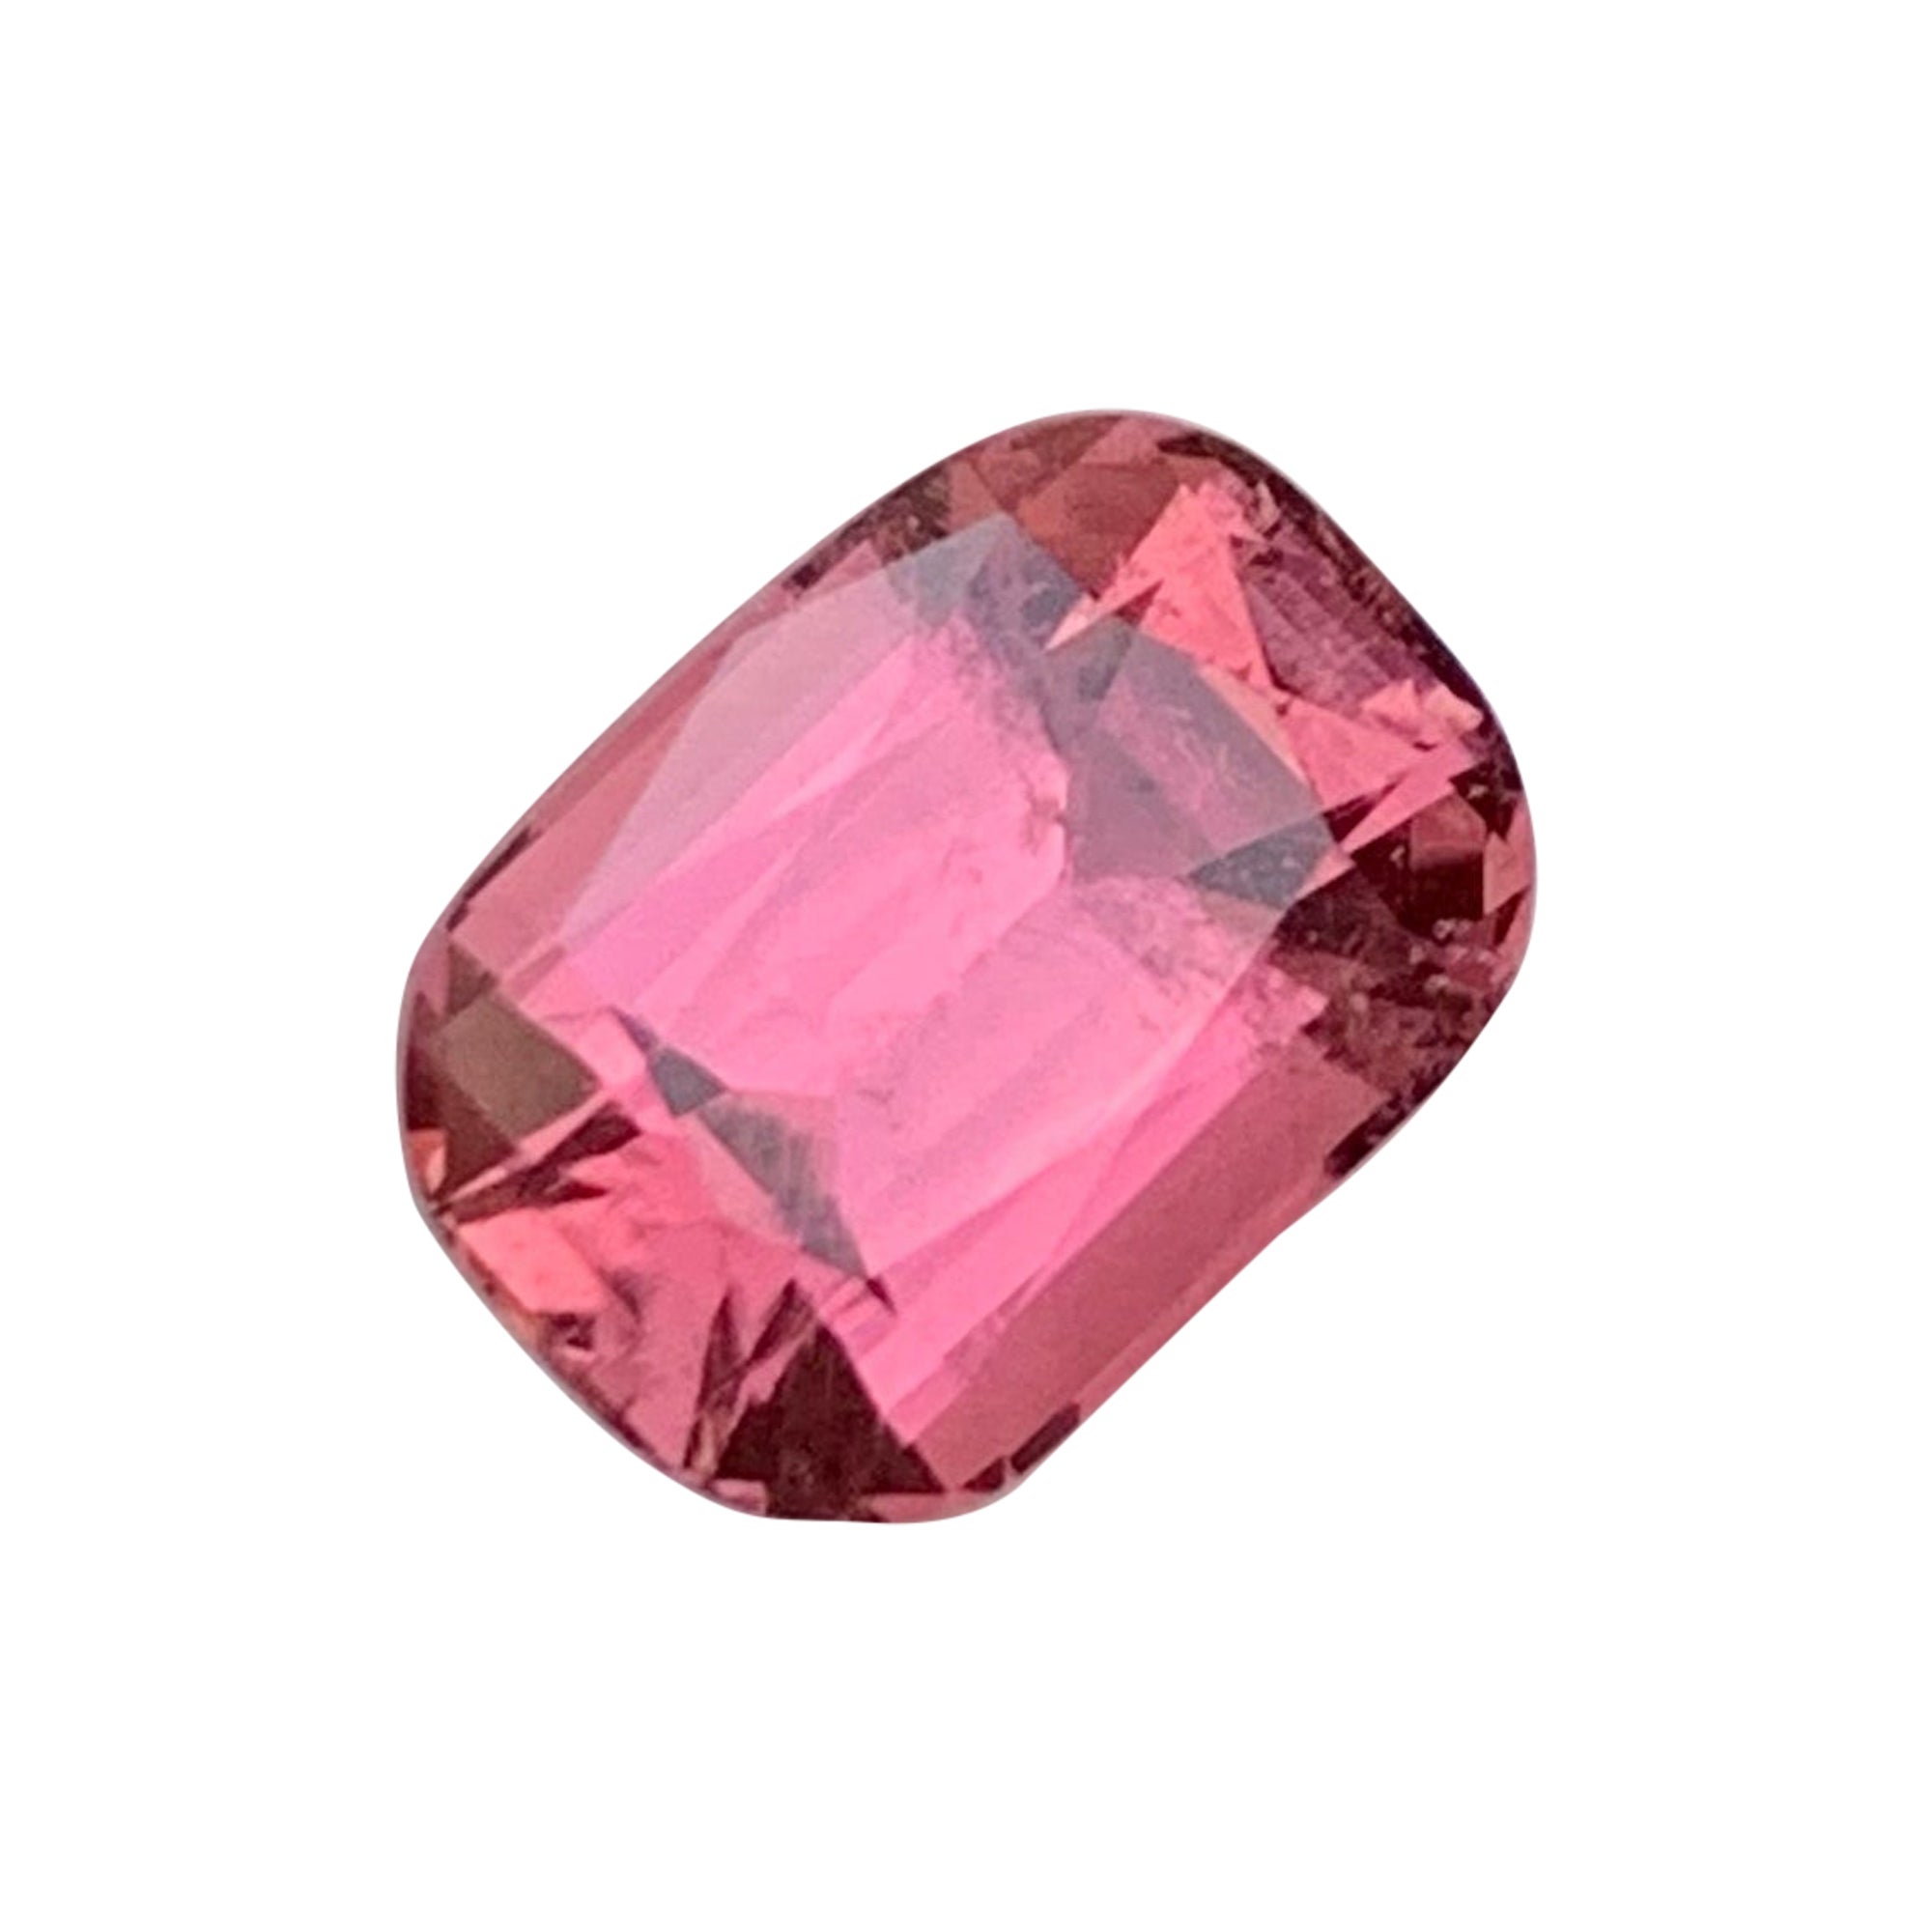 Adorable Sweet Pink Tourmaline Gemstone 2.25 Carats Tourmaline Stone For Jewelry For Sale